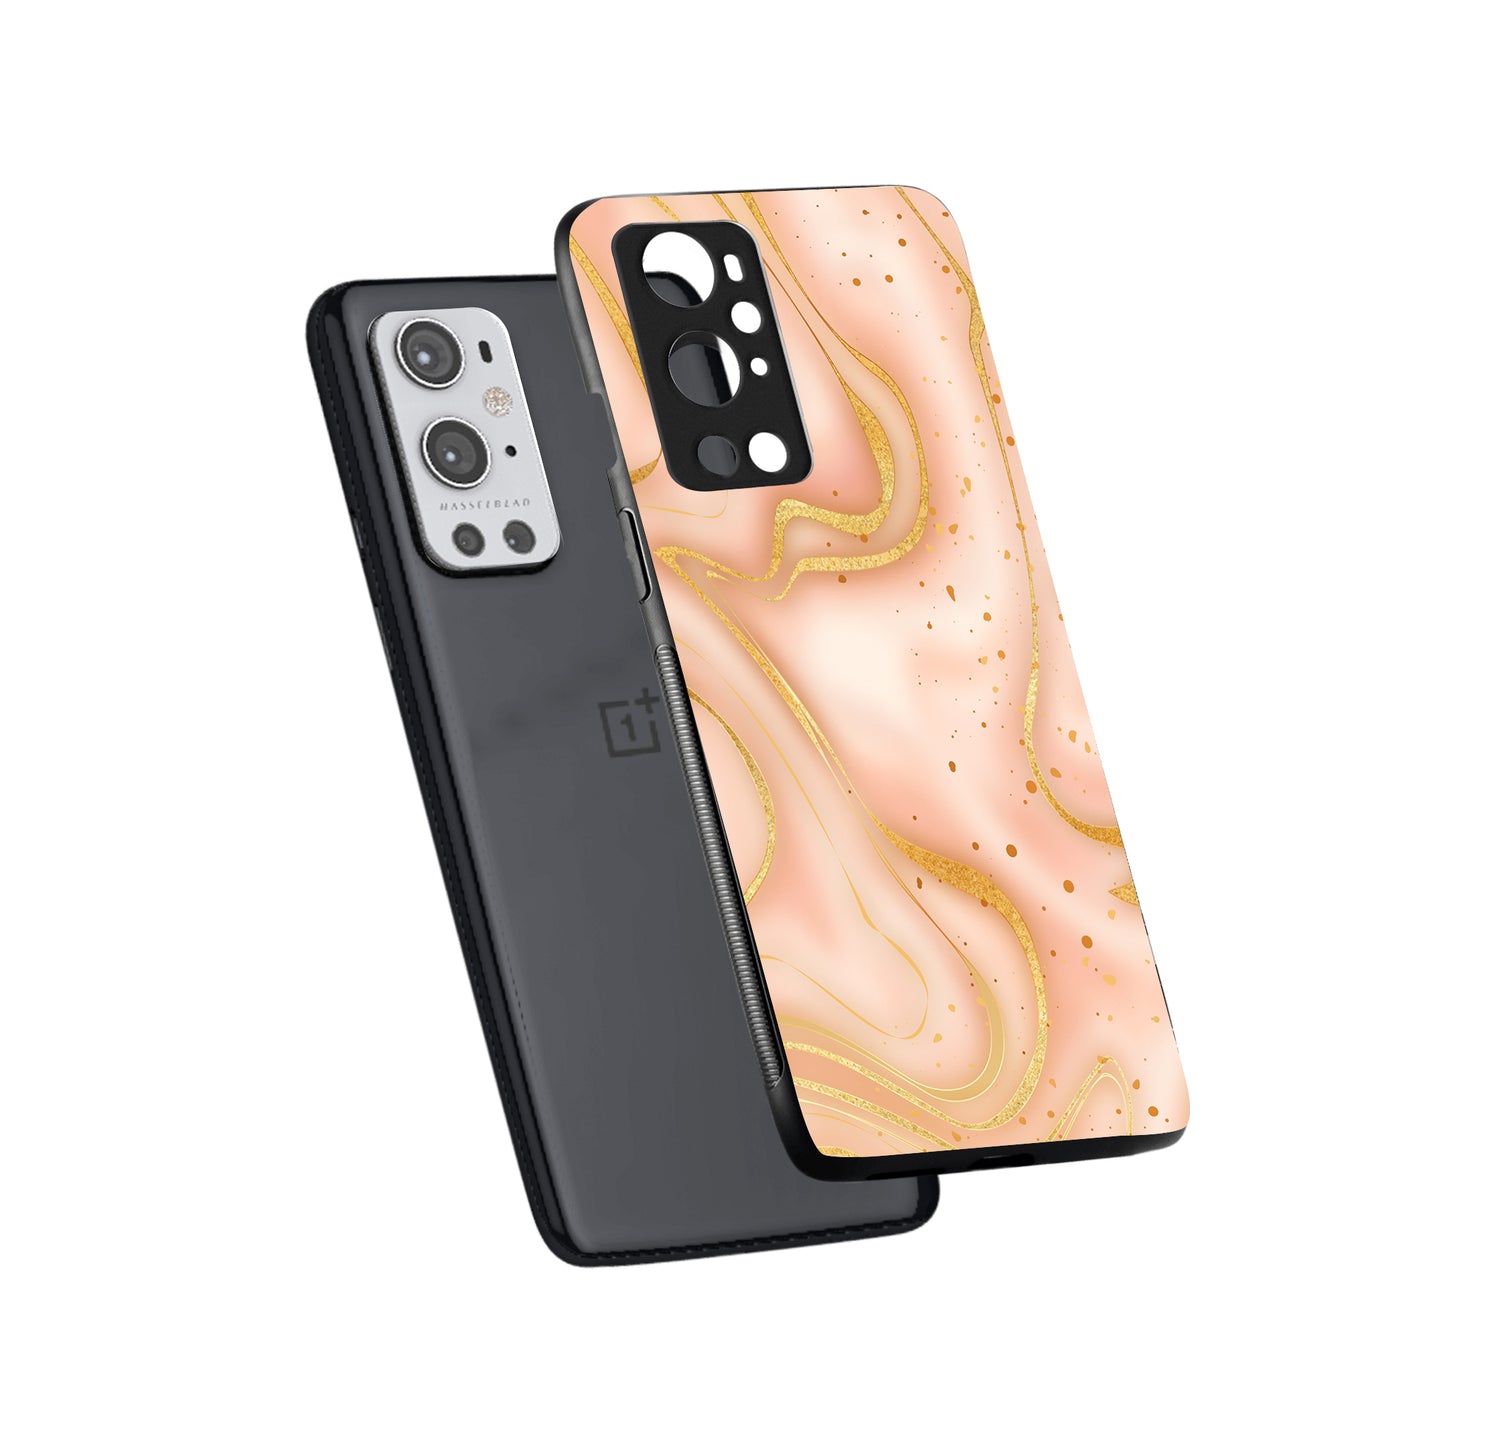 Golden Marble Oneplus 9 Pro Back Case